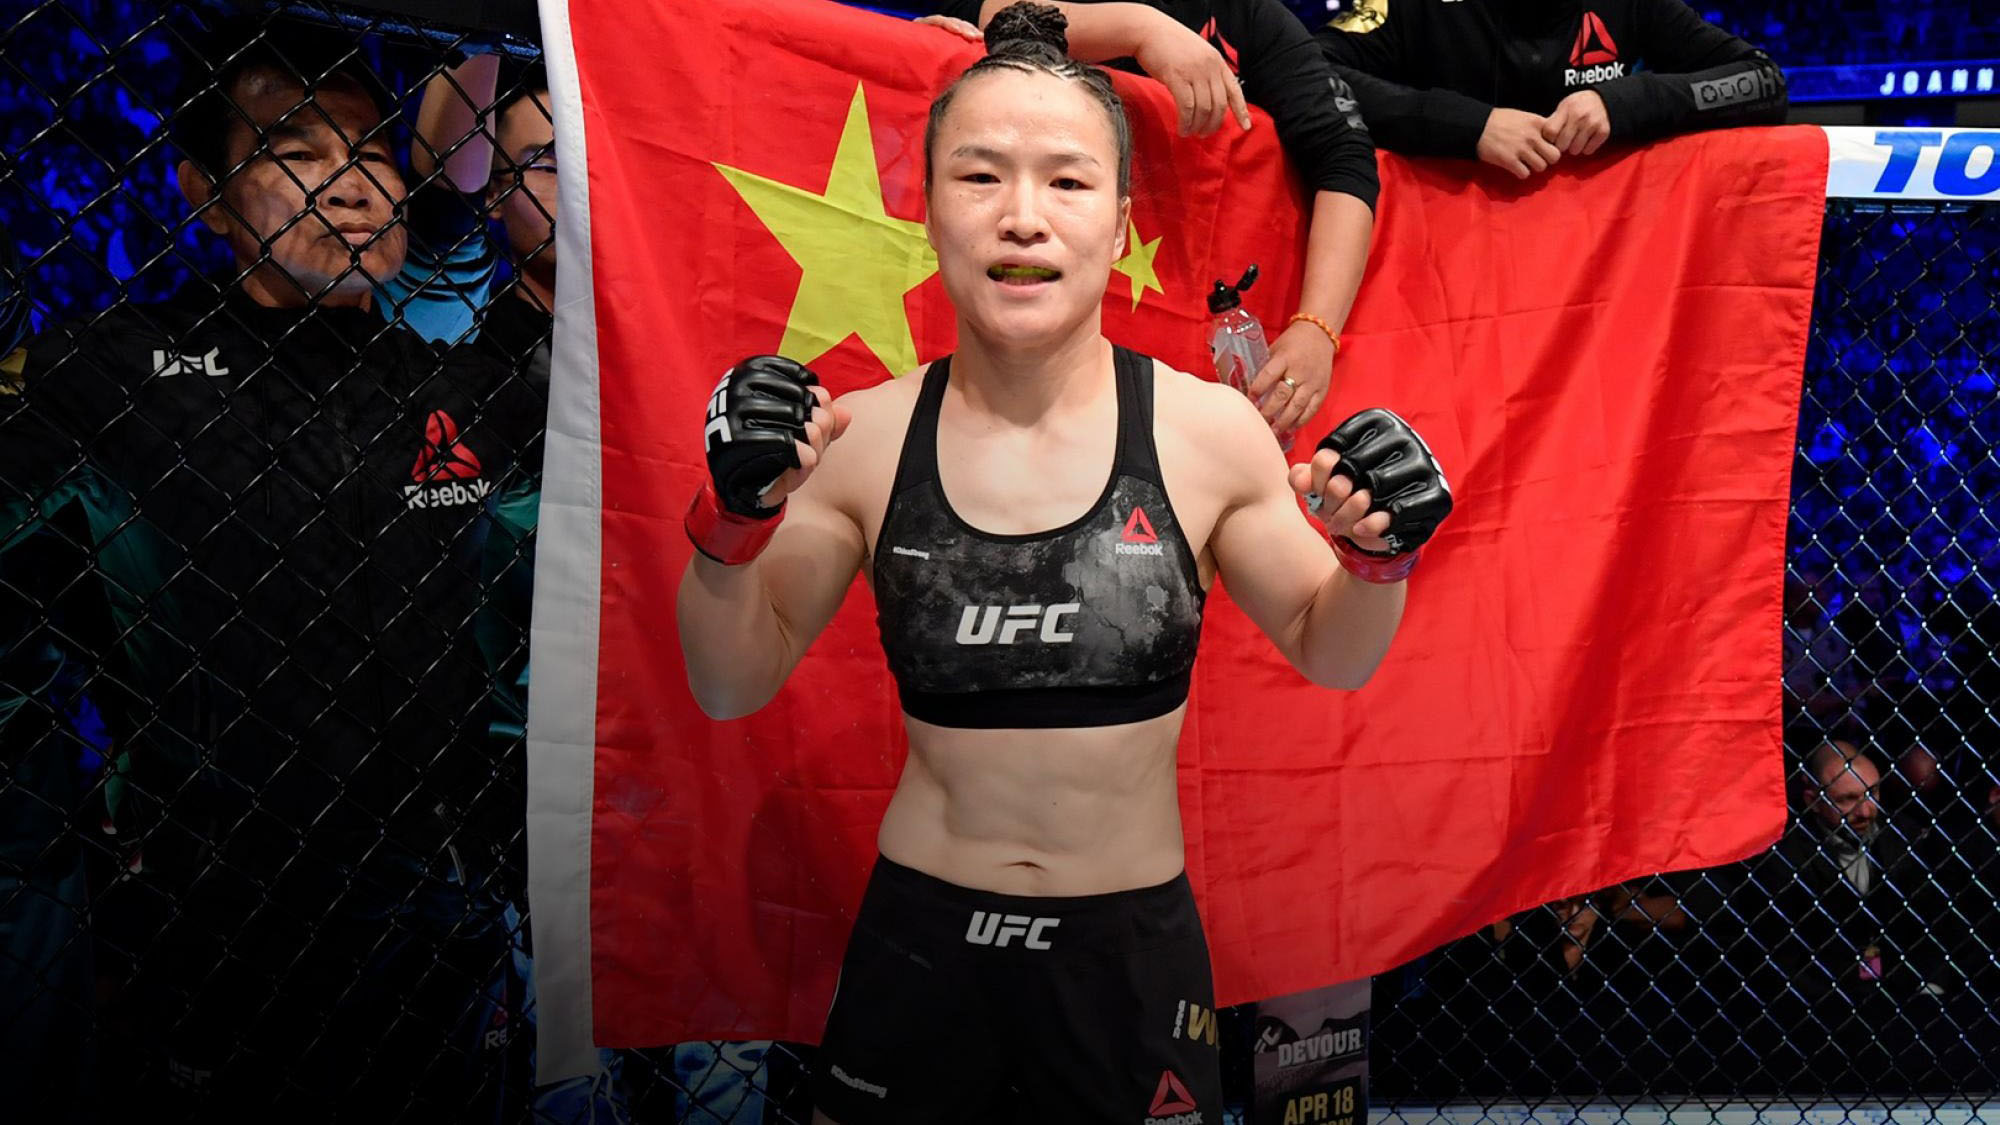 Zhang Weili (Chinese: ???; pinyin: Zh?ng W?ilì; born August 13, 1989) is a Chinese mixed martial artist. She is the former Kunlun Fight (KLF) s...